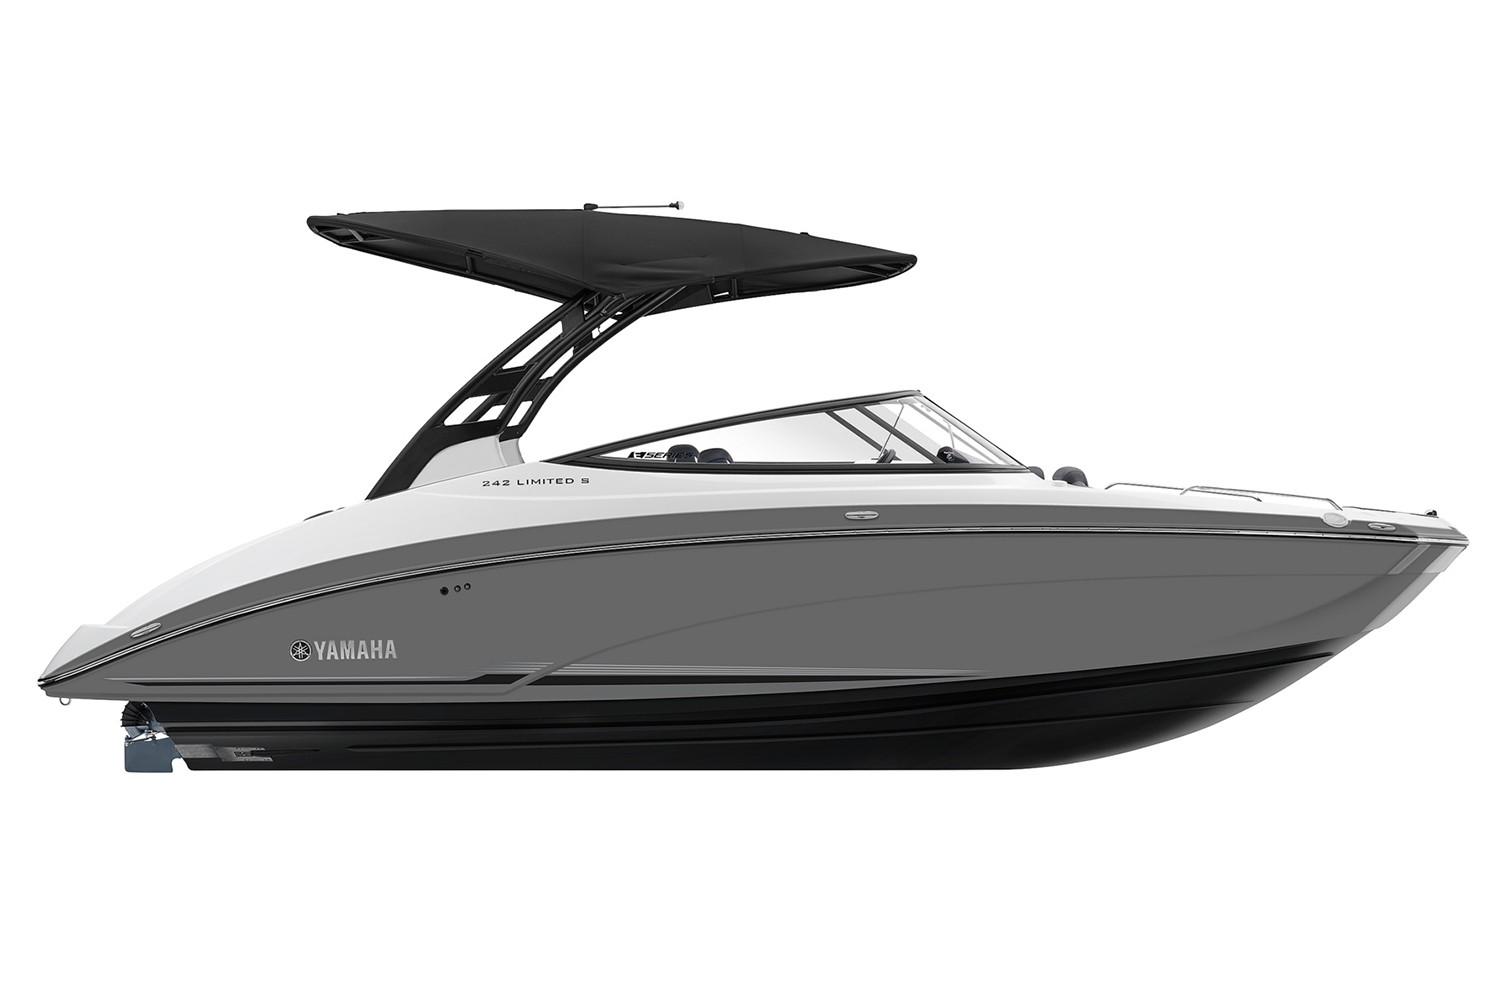 2019 Yamaha 242 Limited S E-Series in Gulfport, Mississippi - Photo 19